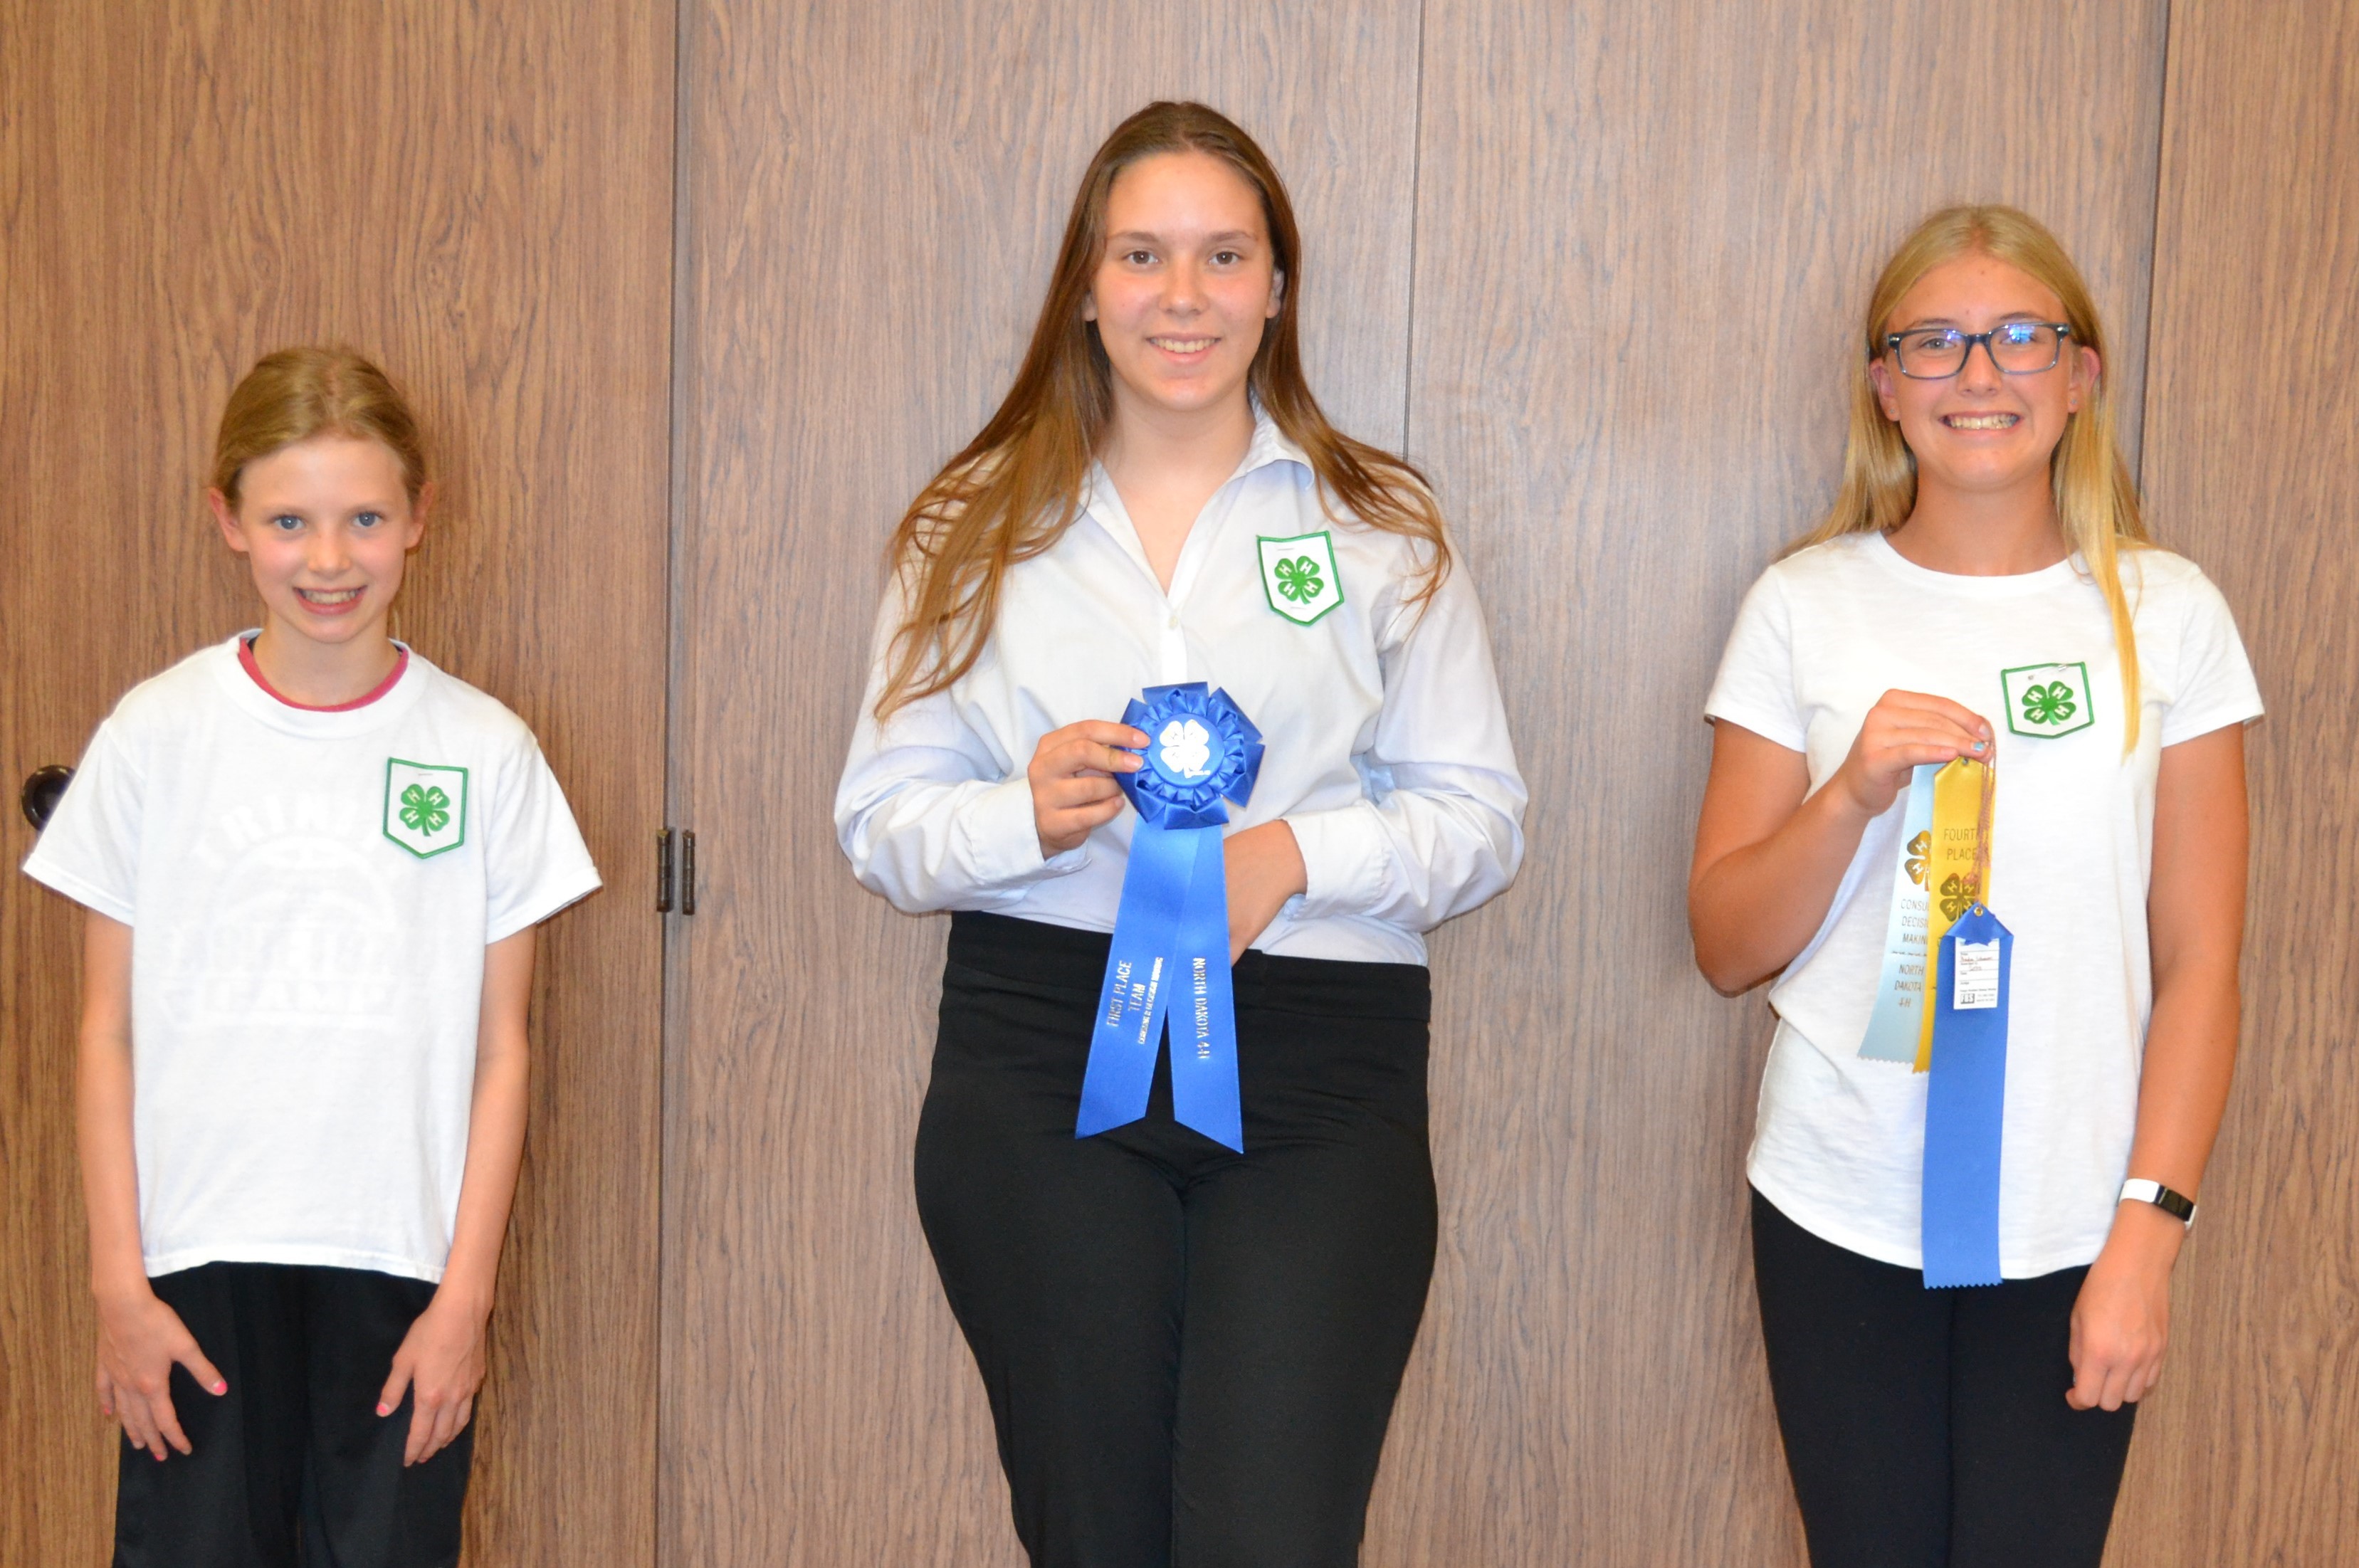 Stark-Billings County's junior team took first place in the junior division of the 2020 North Dakota 4-H consumer decision making contest. Pictured are, from left: Carley Bullinger, Paula Meyer and Phaden Schrum. (NDSU photo)